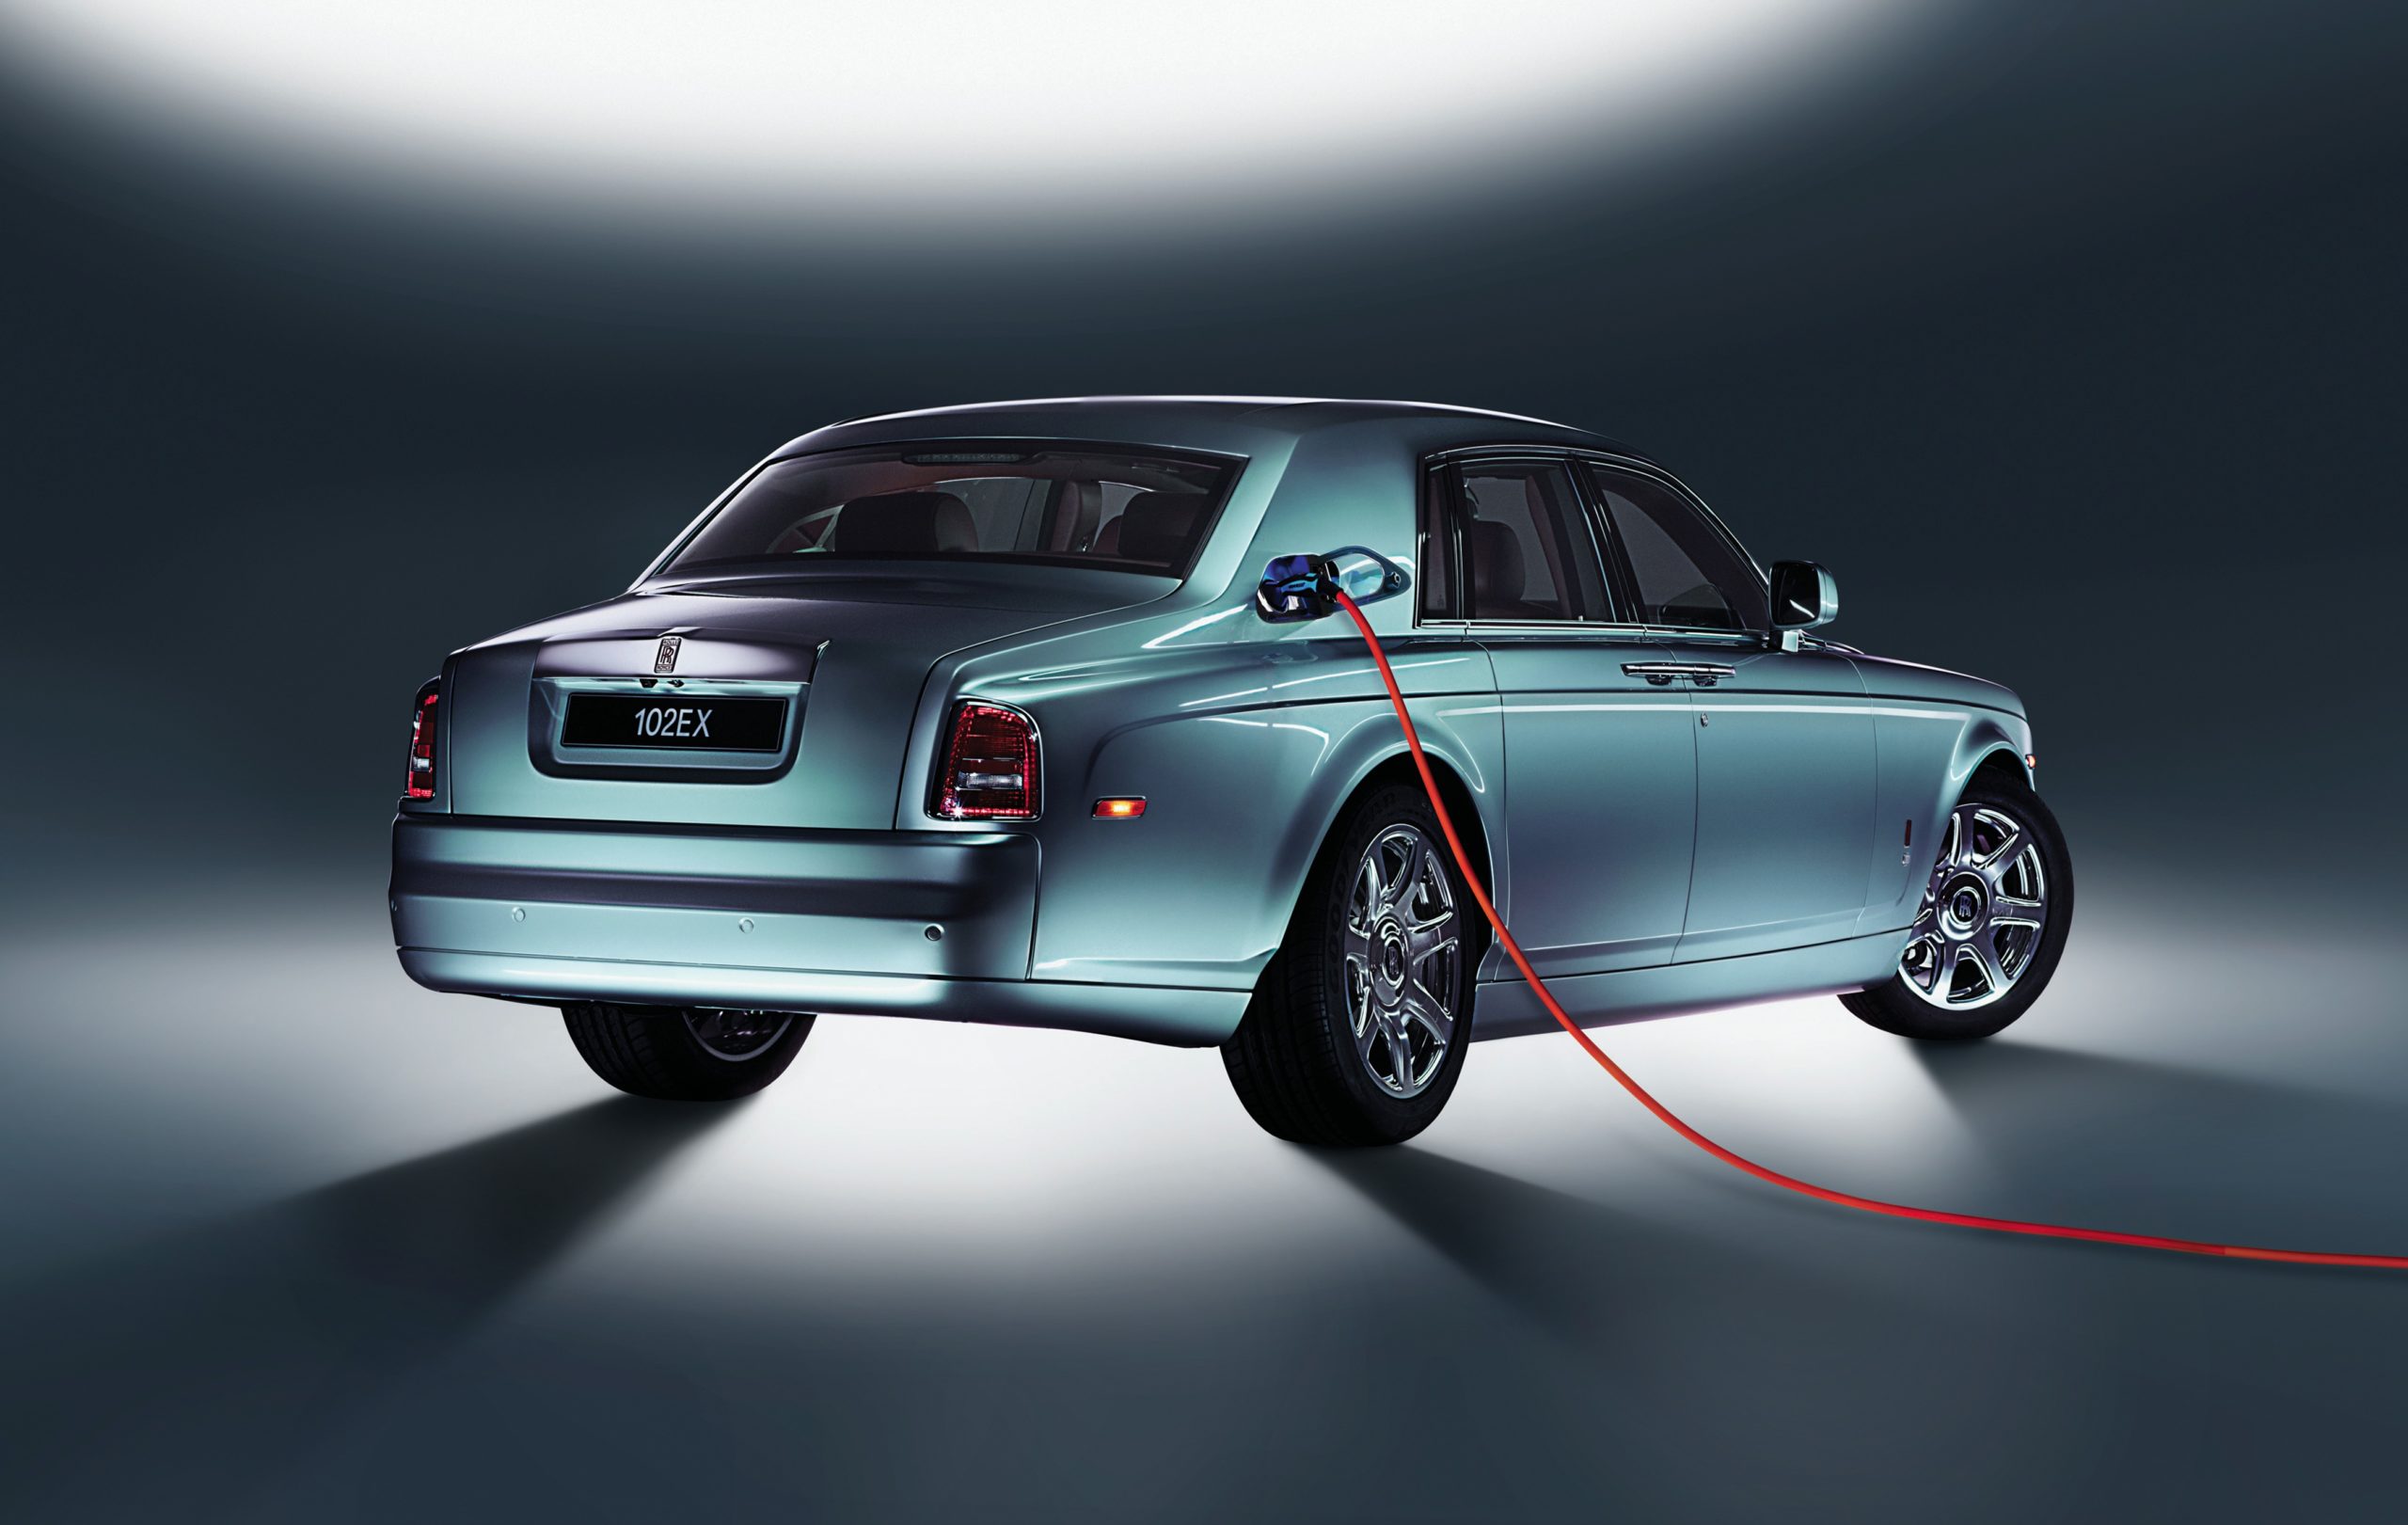 This is the Future of Rolls Royce in All-Electric Cars